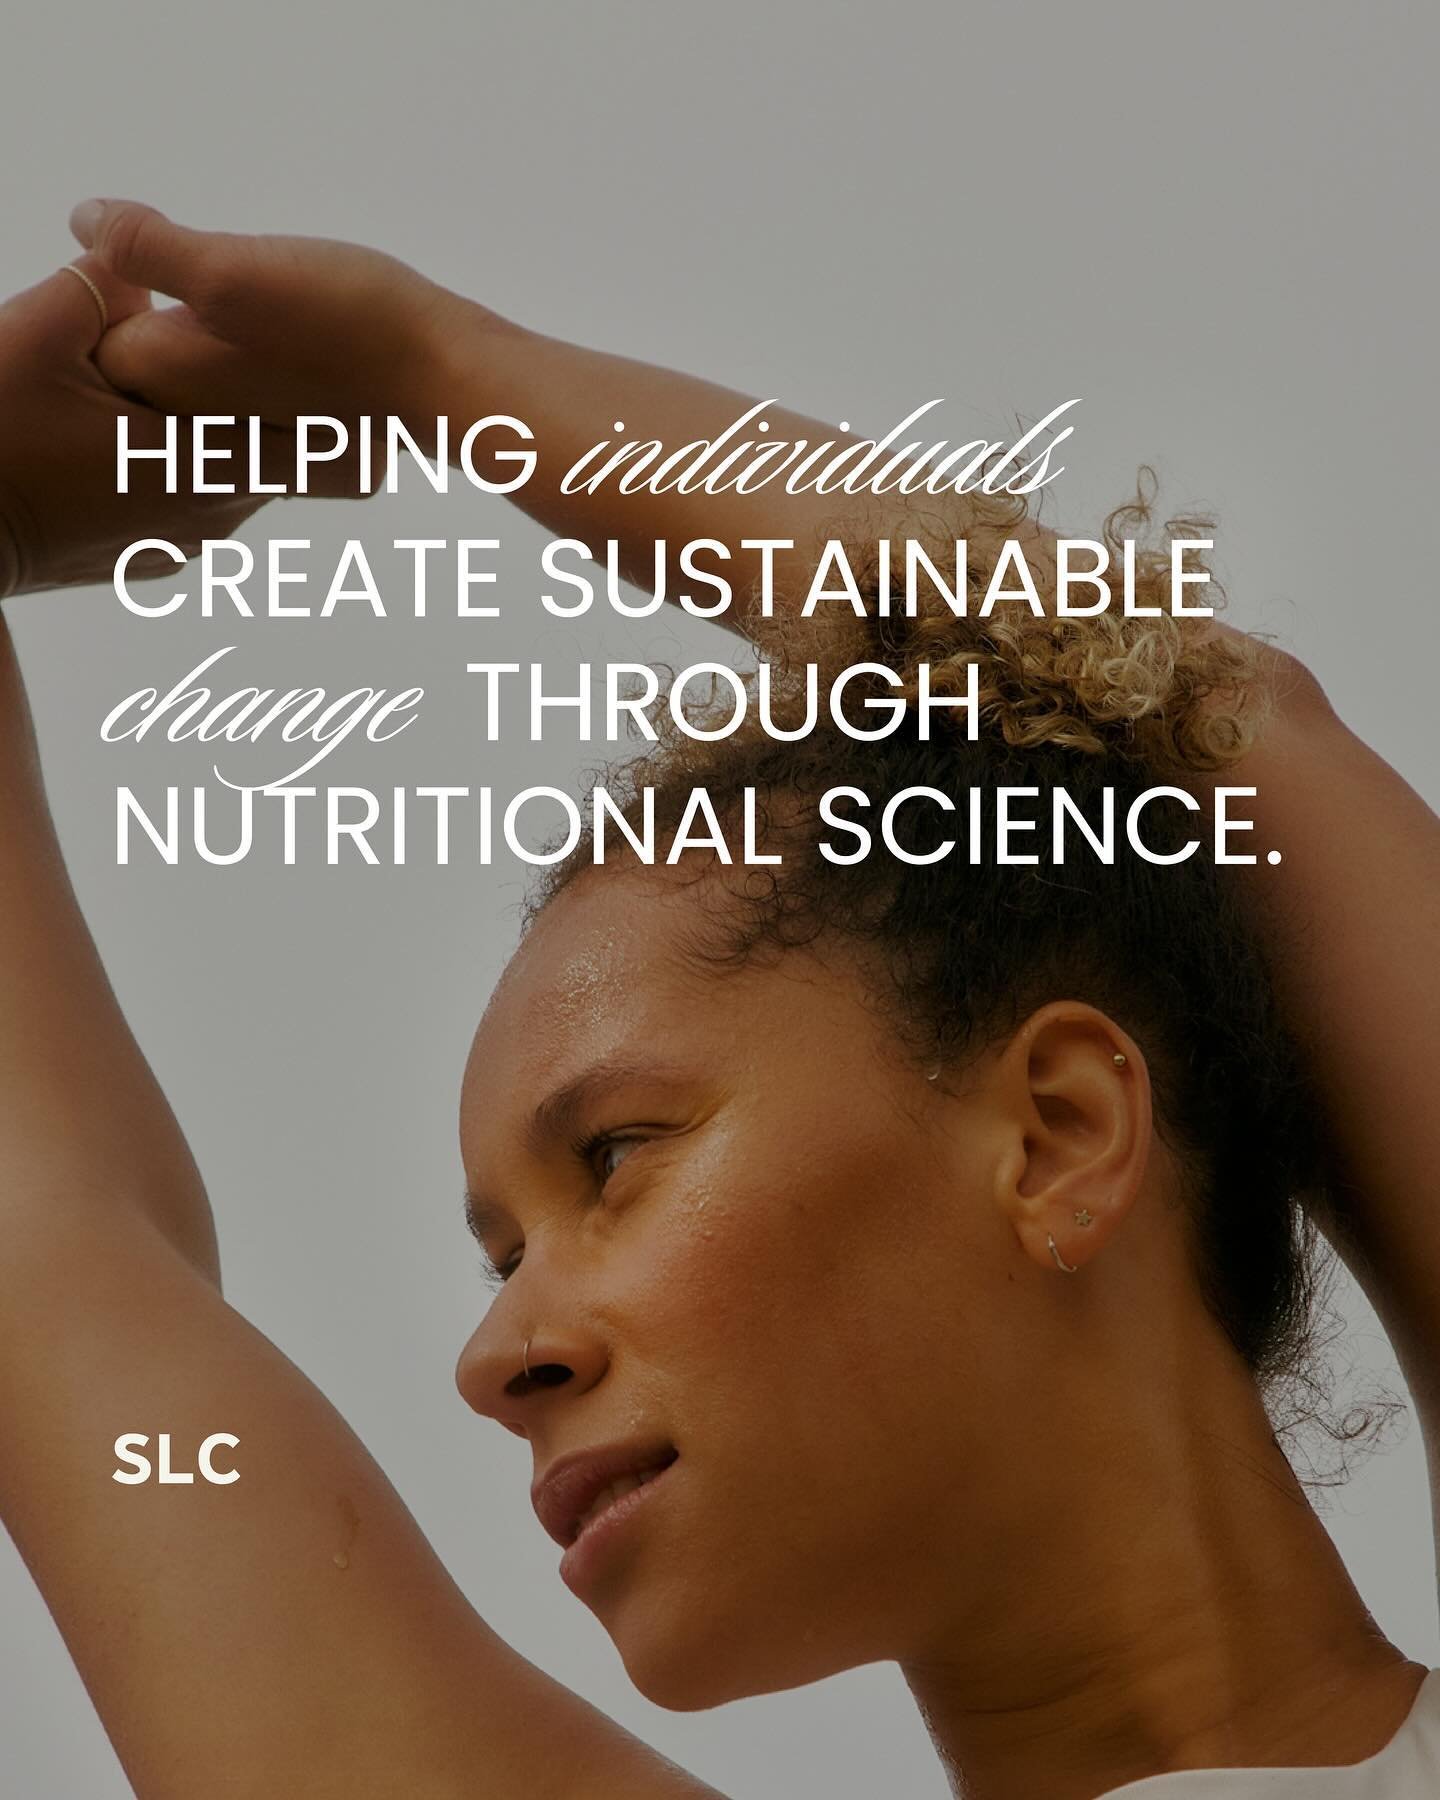 INTRODUCING - Sam Laurence Coaching

Sam helps individuals create sustainable change through nutritional science. He provides his client with unparalleled support and guidance, something we strived to show through his clean, professional &amp; sleek 